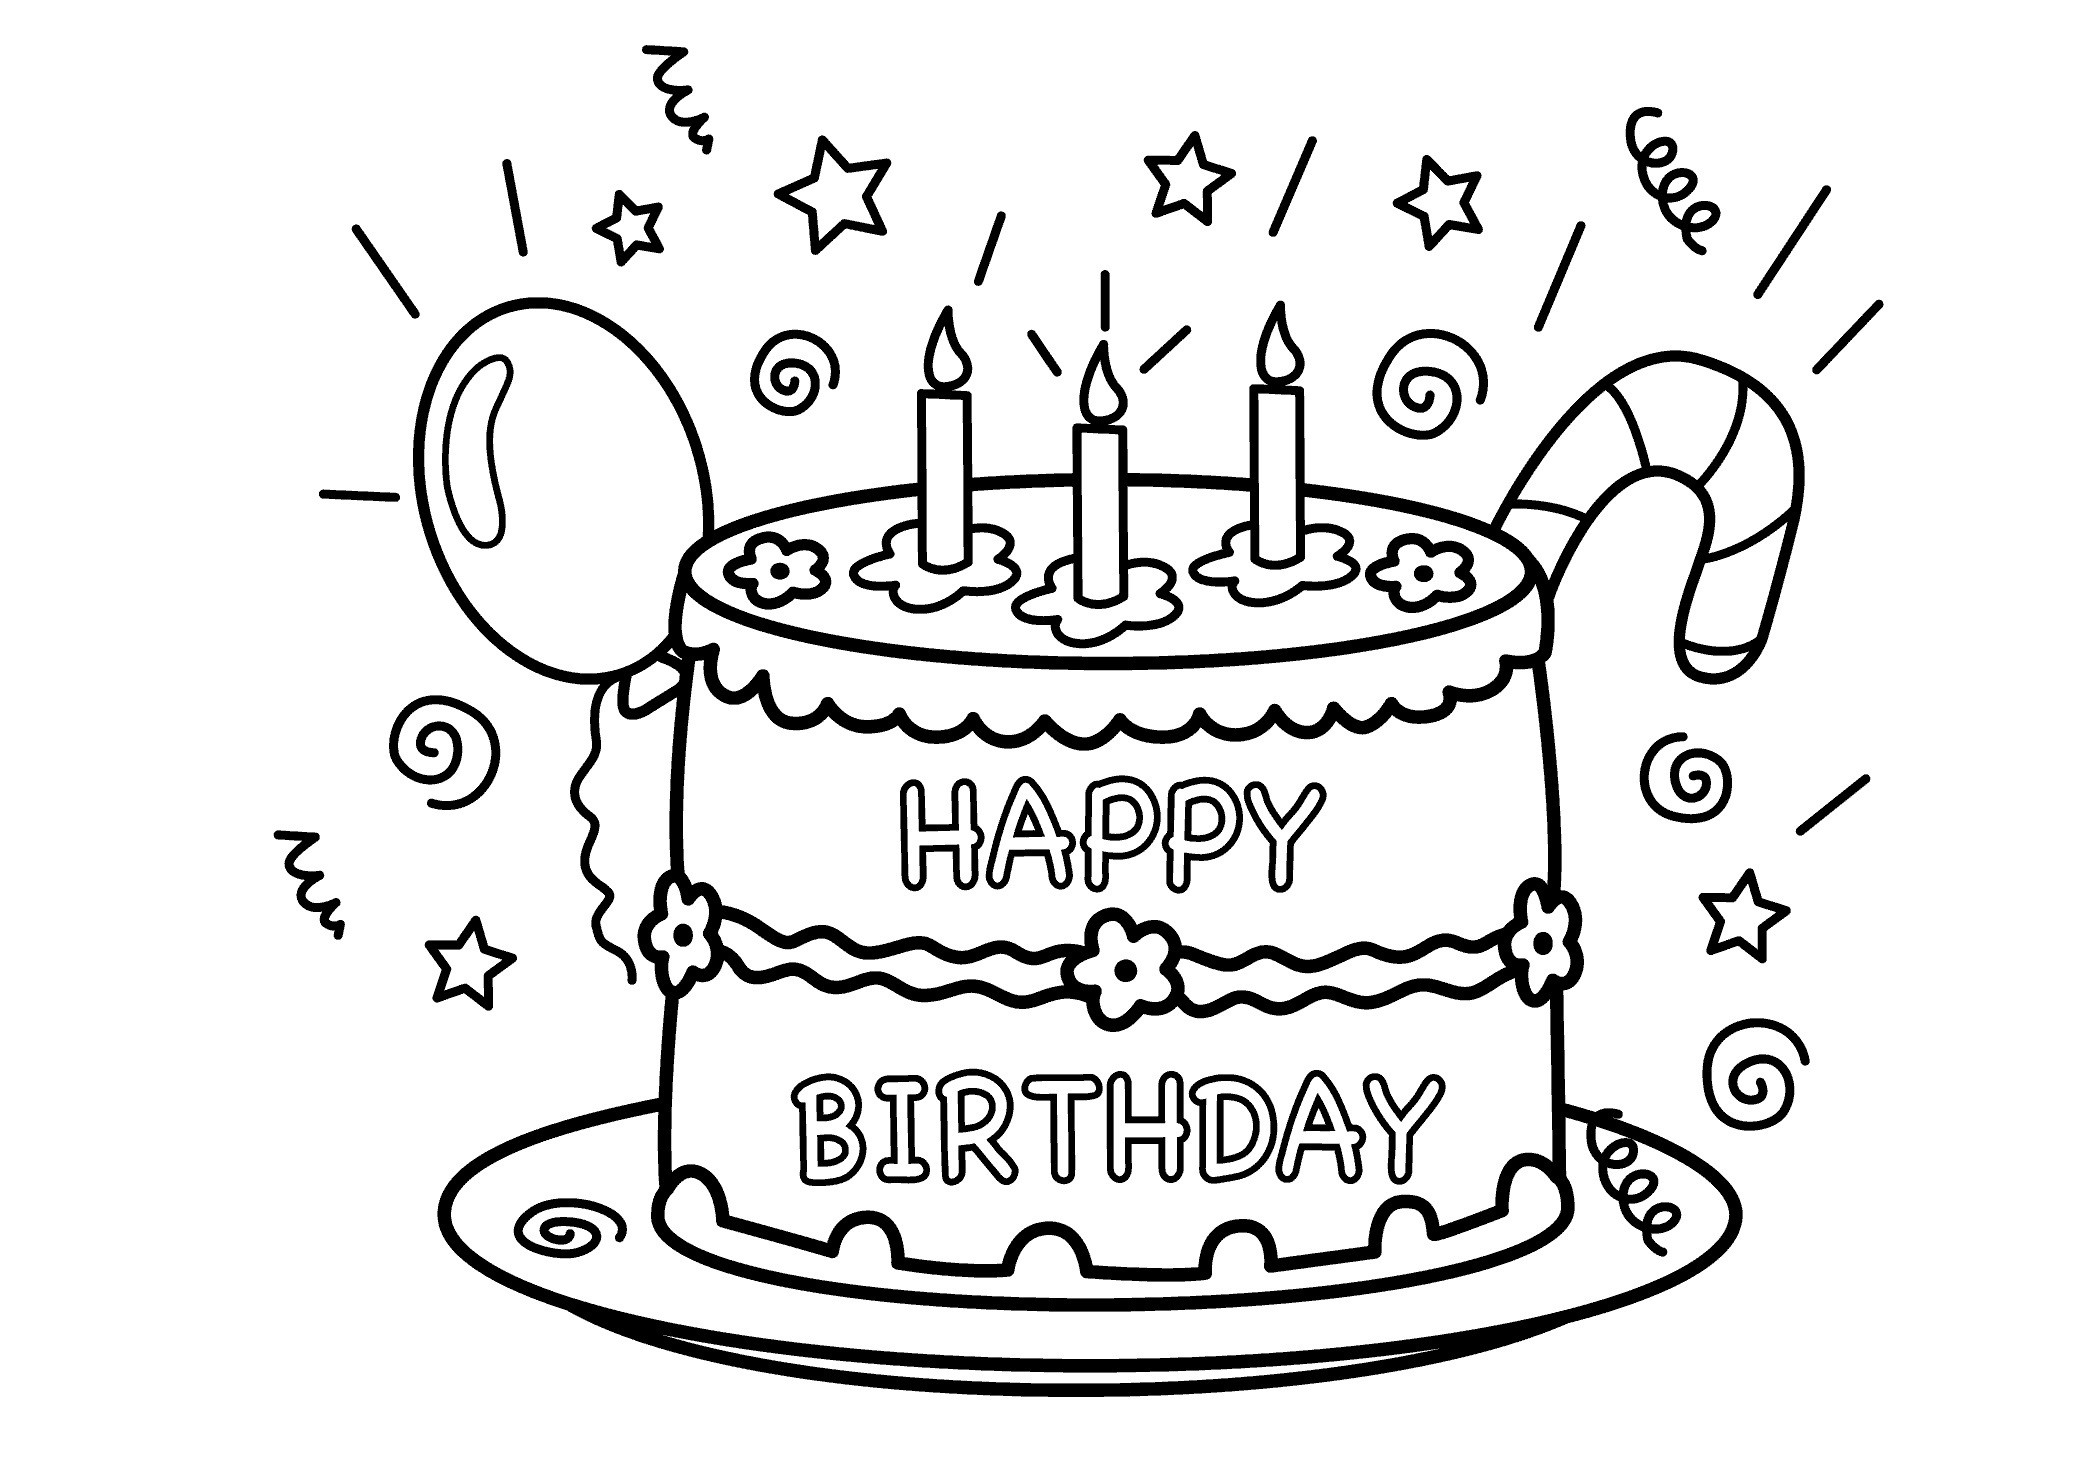 Birthday Cake Coloring Page Unique Free Printable Birthday Cake Coloring Pages for Kids